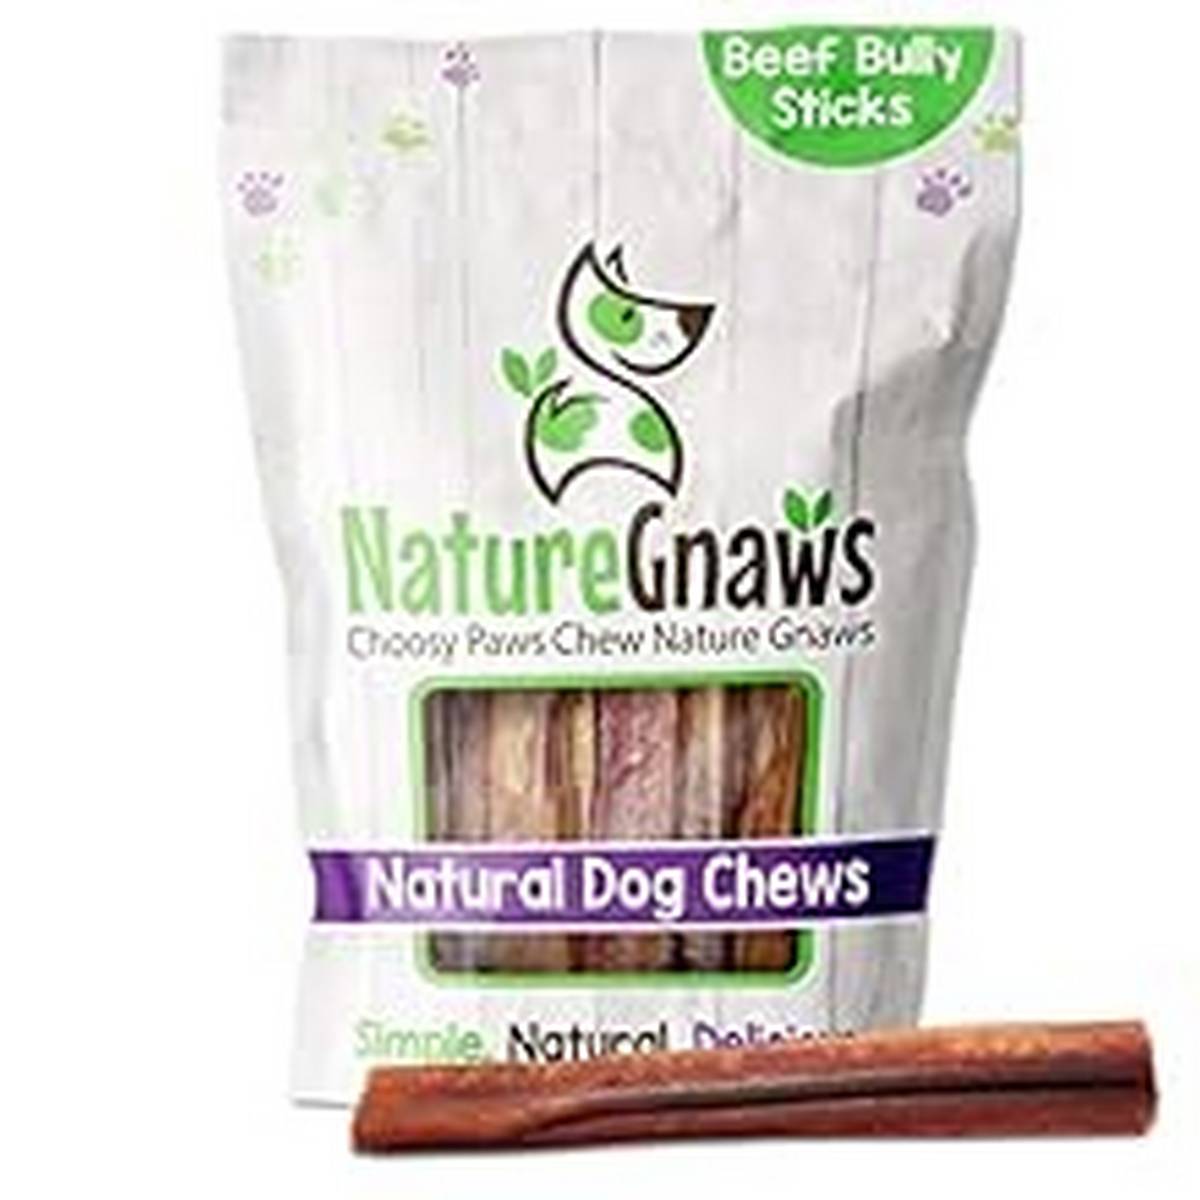 Supplies_Nature Gnaws Bully Sticks for Dogs - Premium Natural Beef Dental Bones - Long Lasting Dog Chew Treats for Aggressive Chewers - Rawhide Free - inch oz